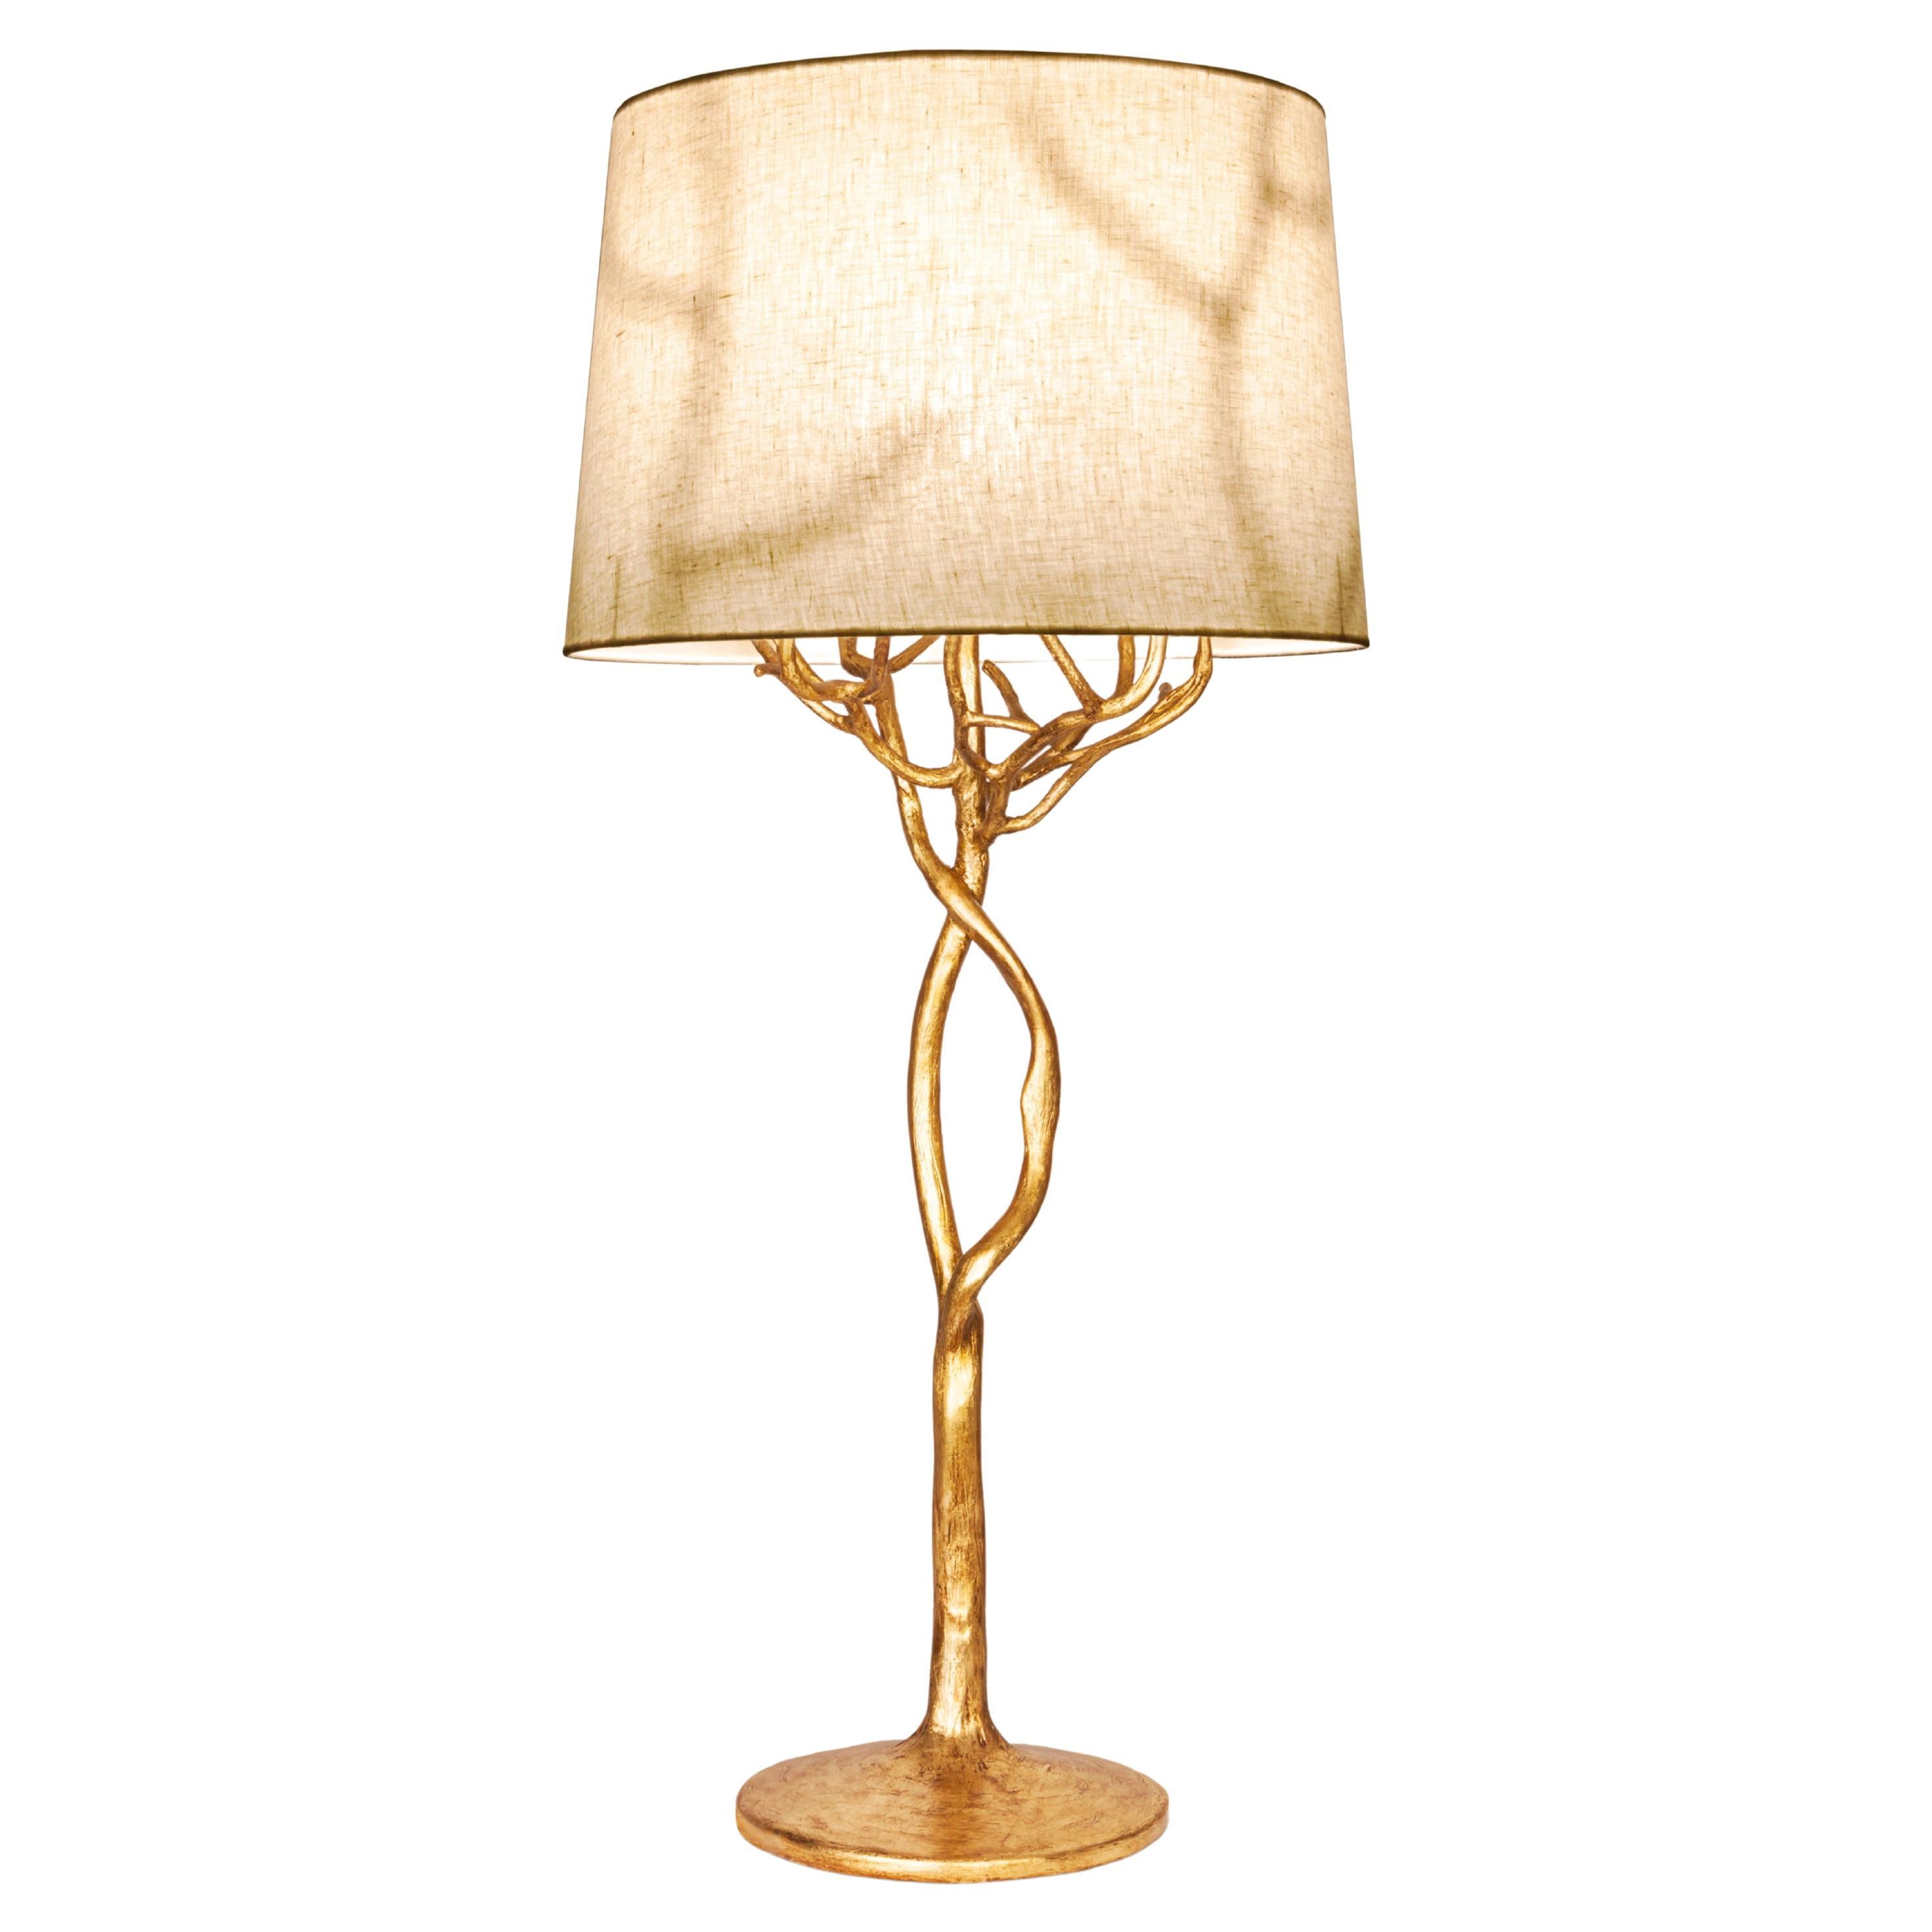 Organic Table Lamp “Etna” in Antique Gold Finish, Benediko For Sale